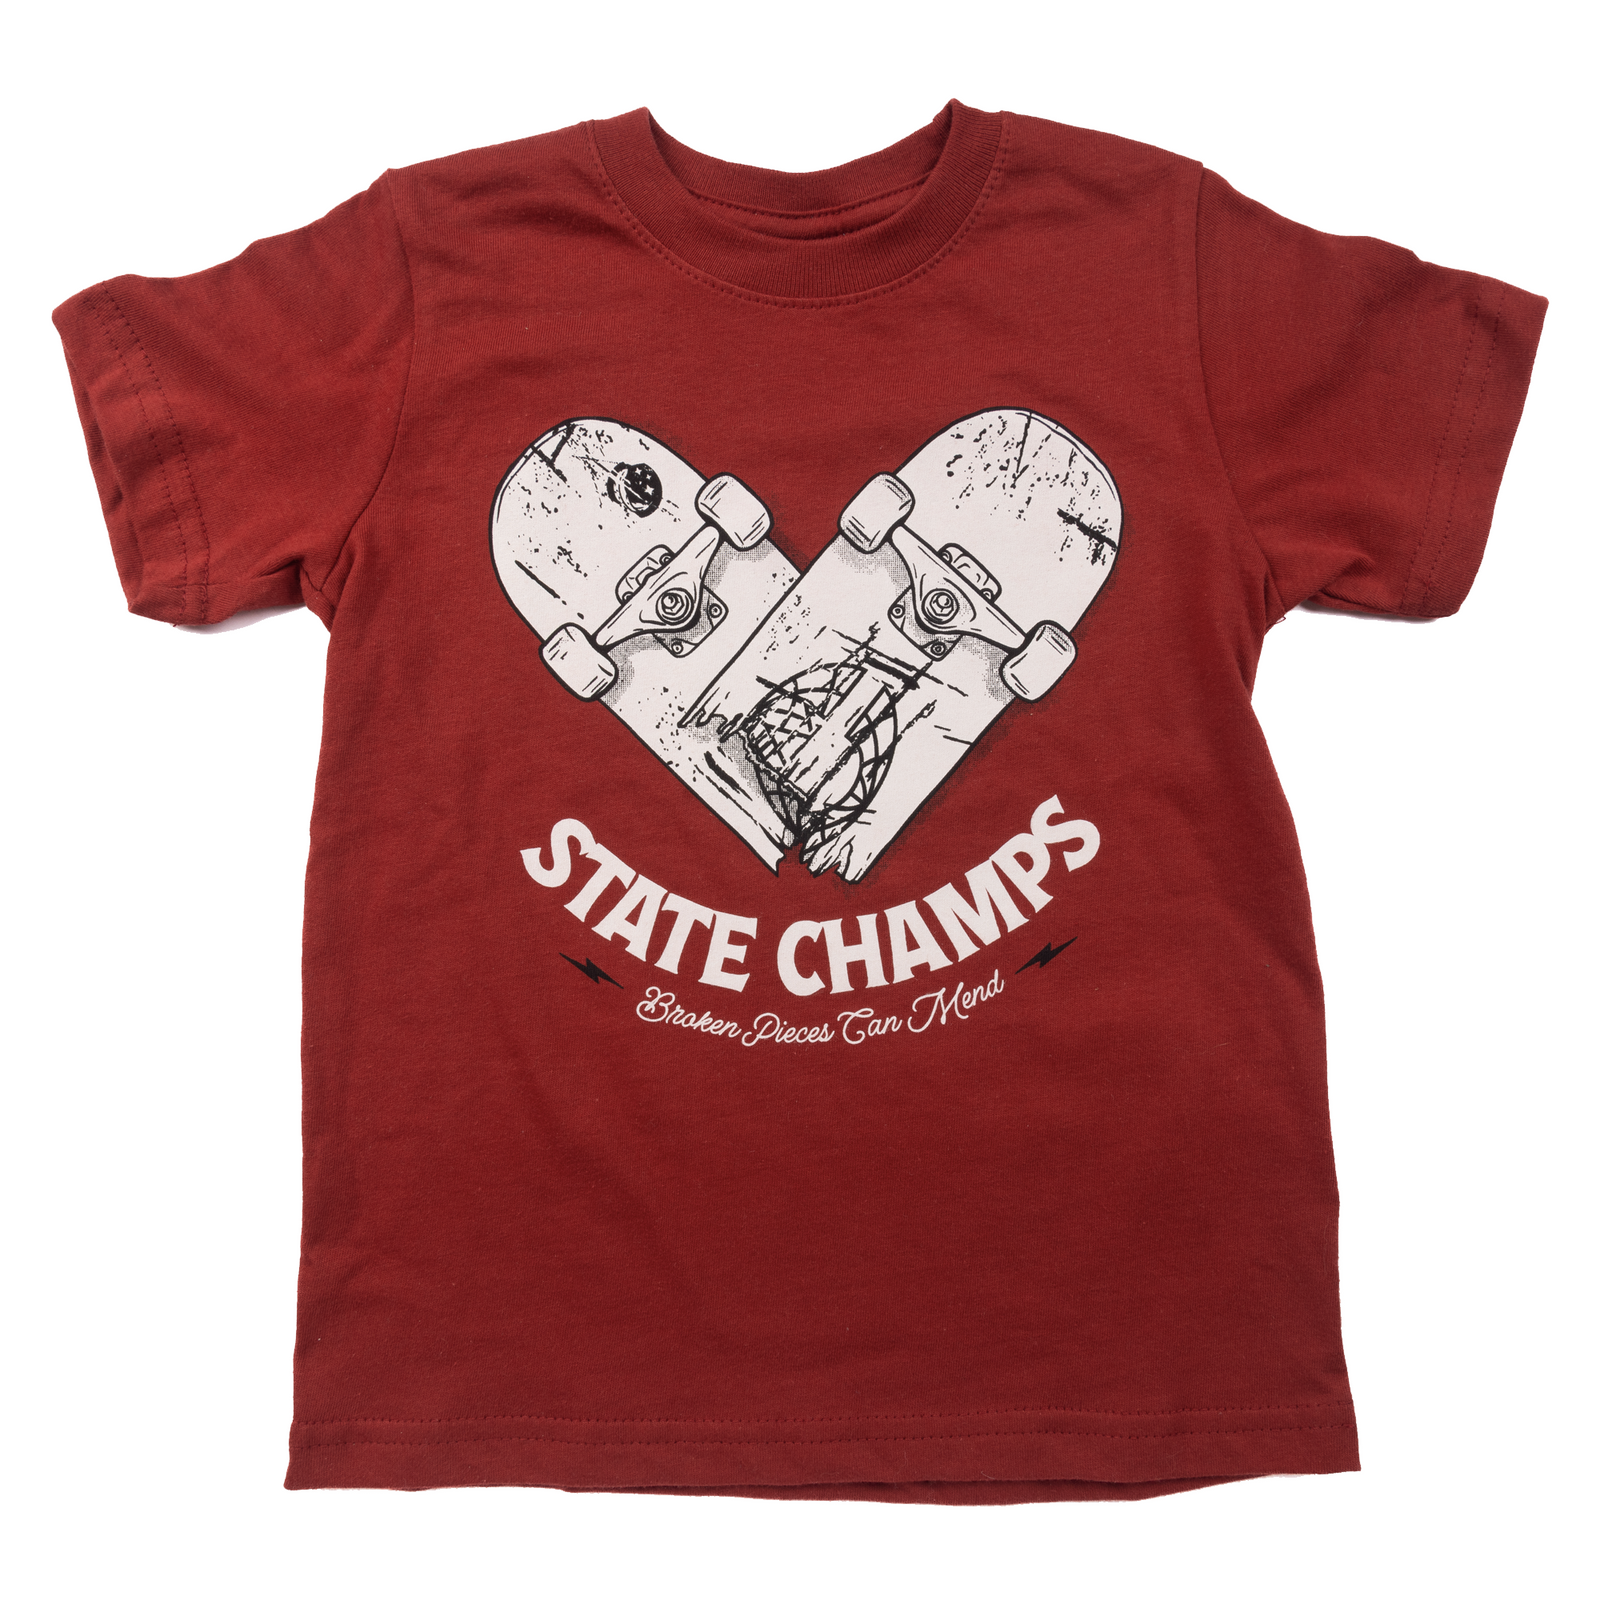 State Champs Toddler T-Shirt